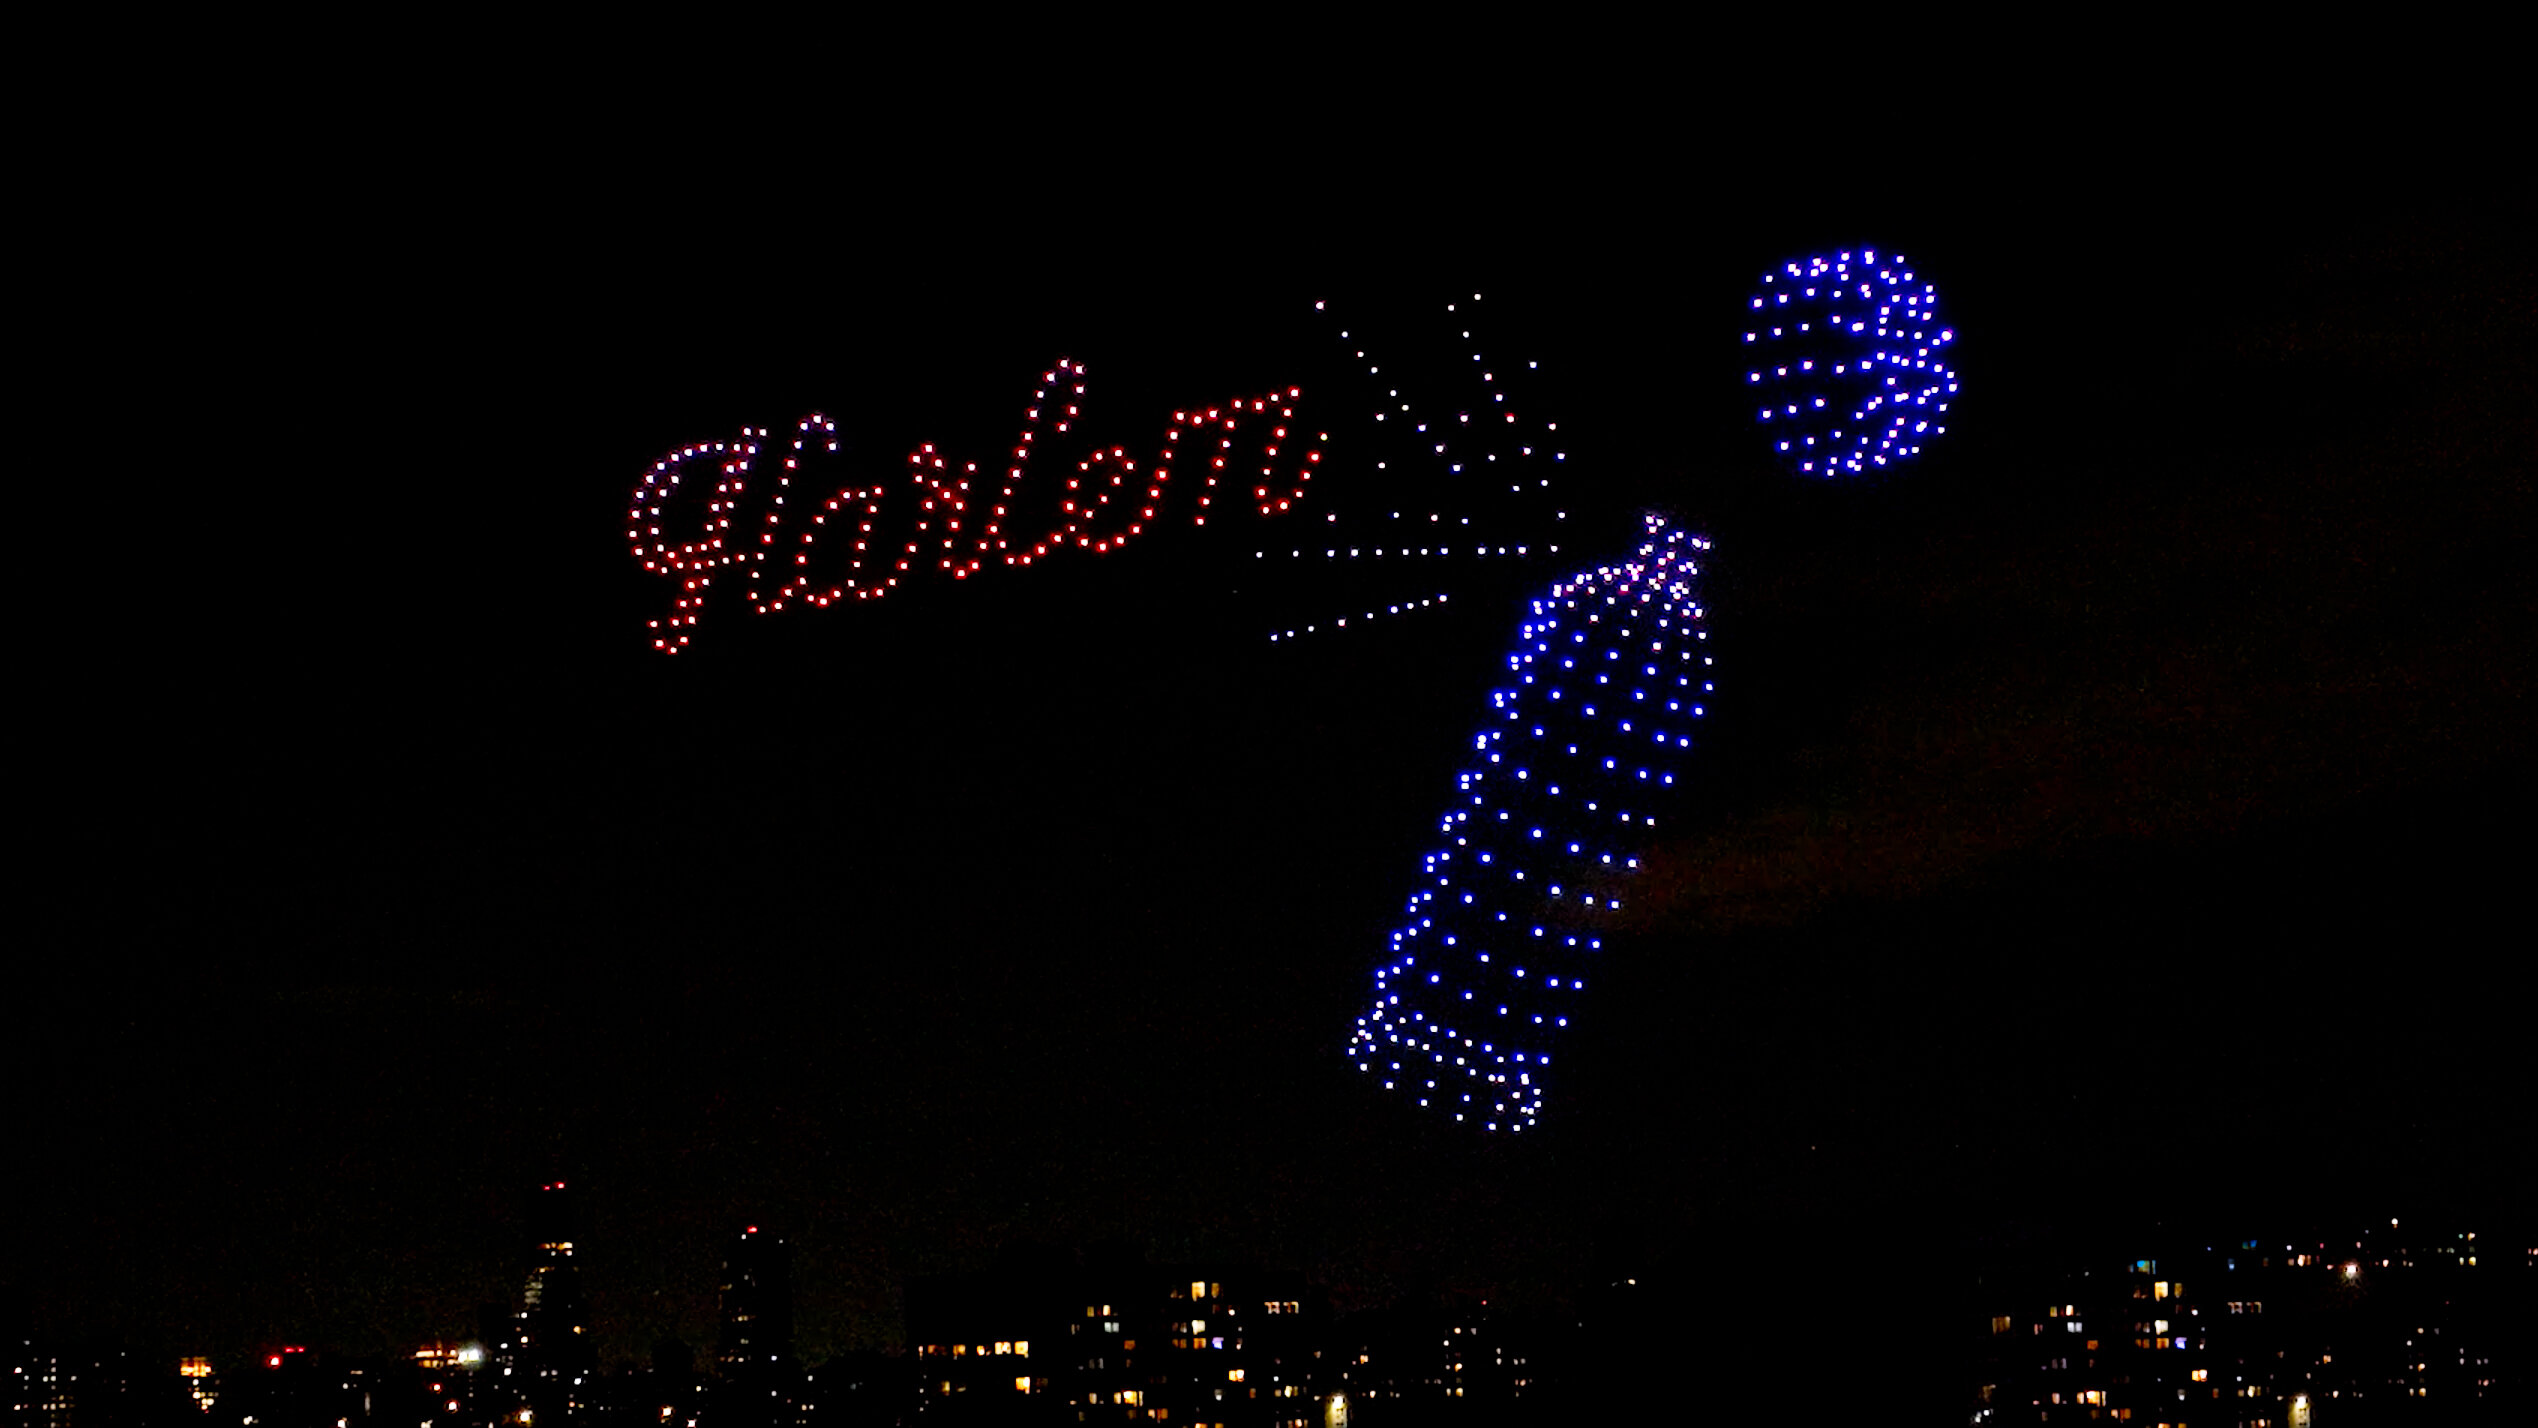 Tagging Harlem in the sky for NYC Hip Hop 50 Drone Light Show in Manhattan